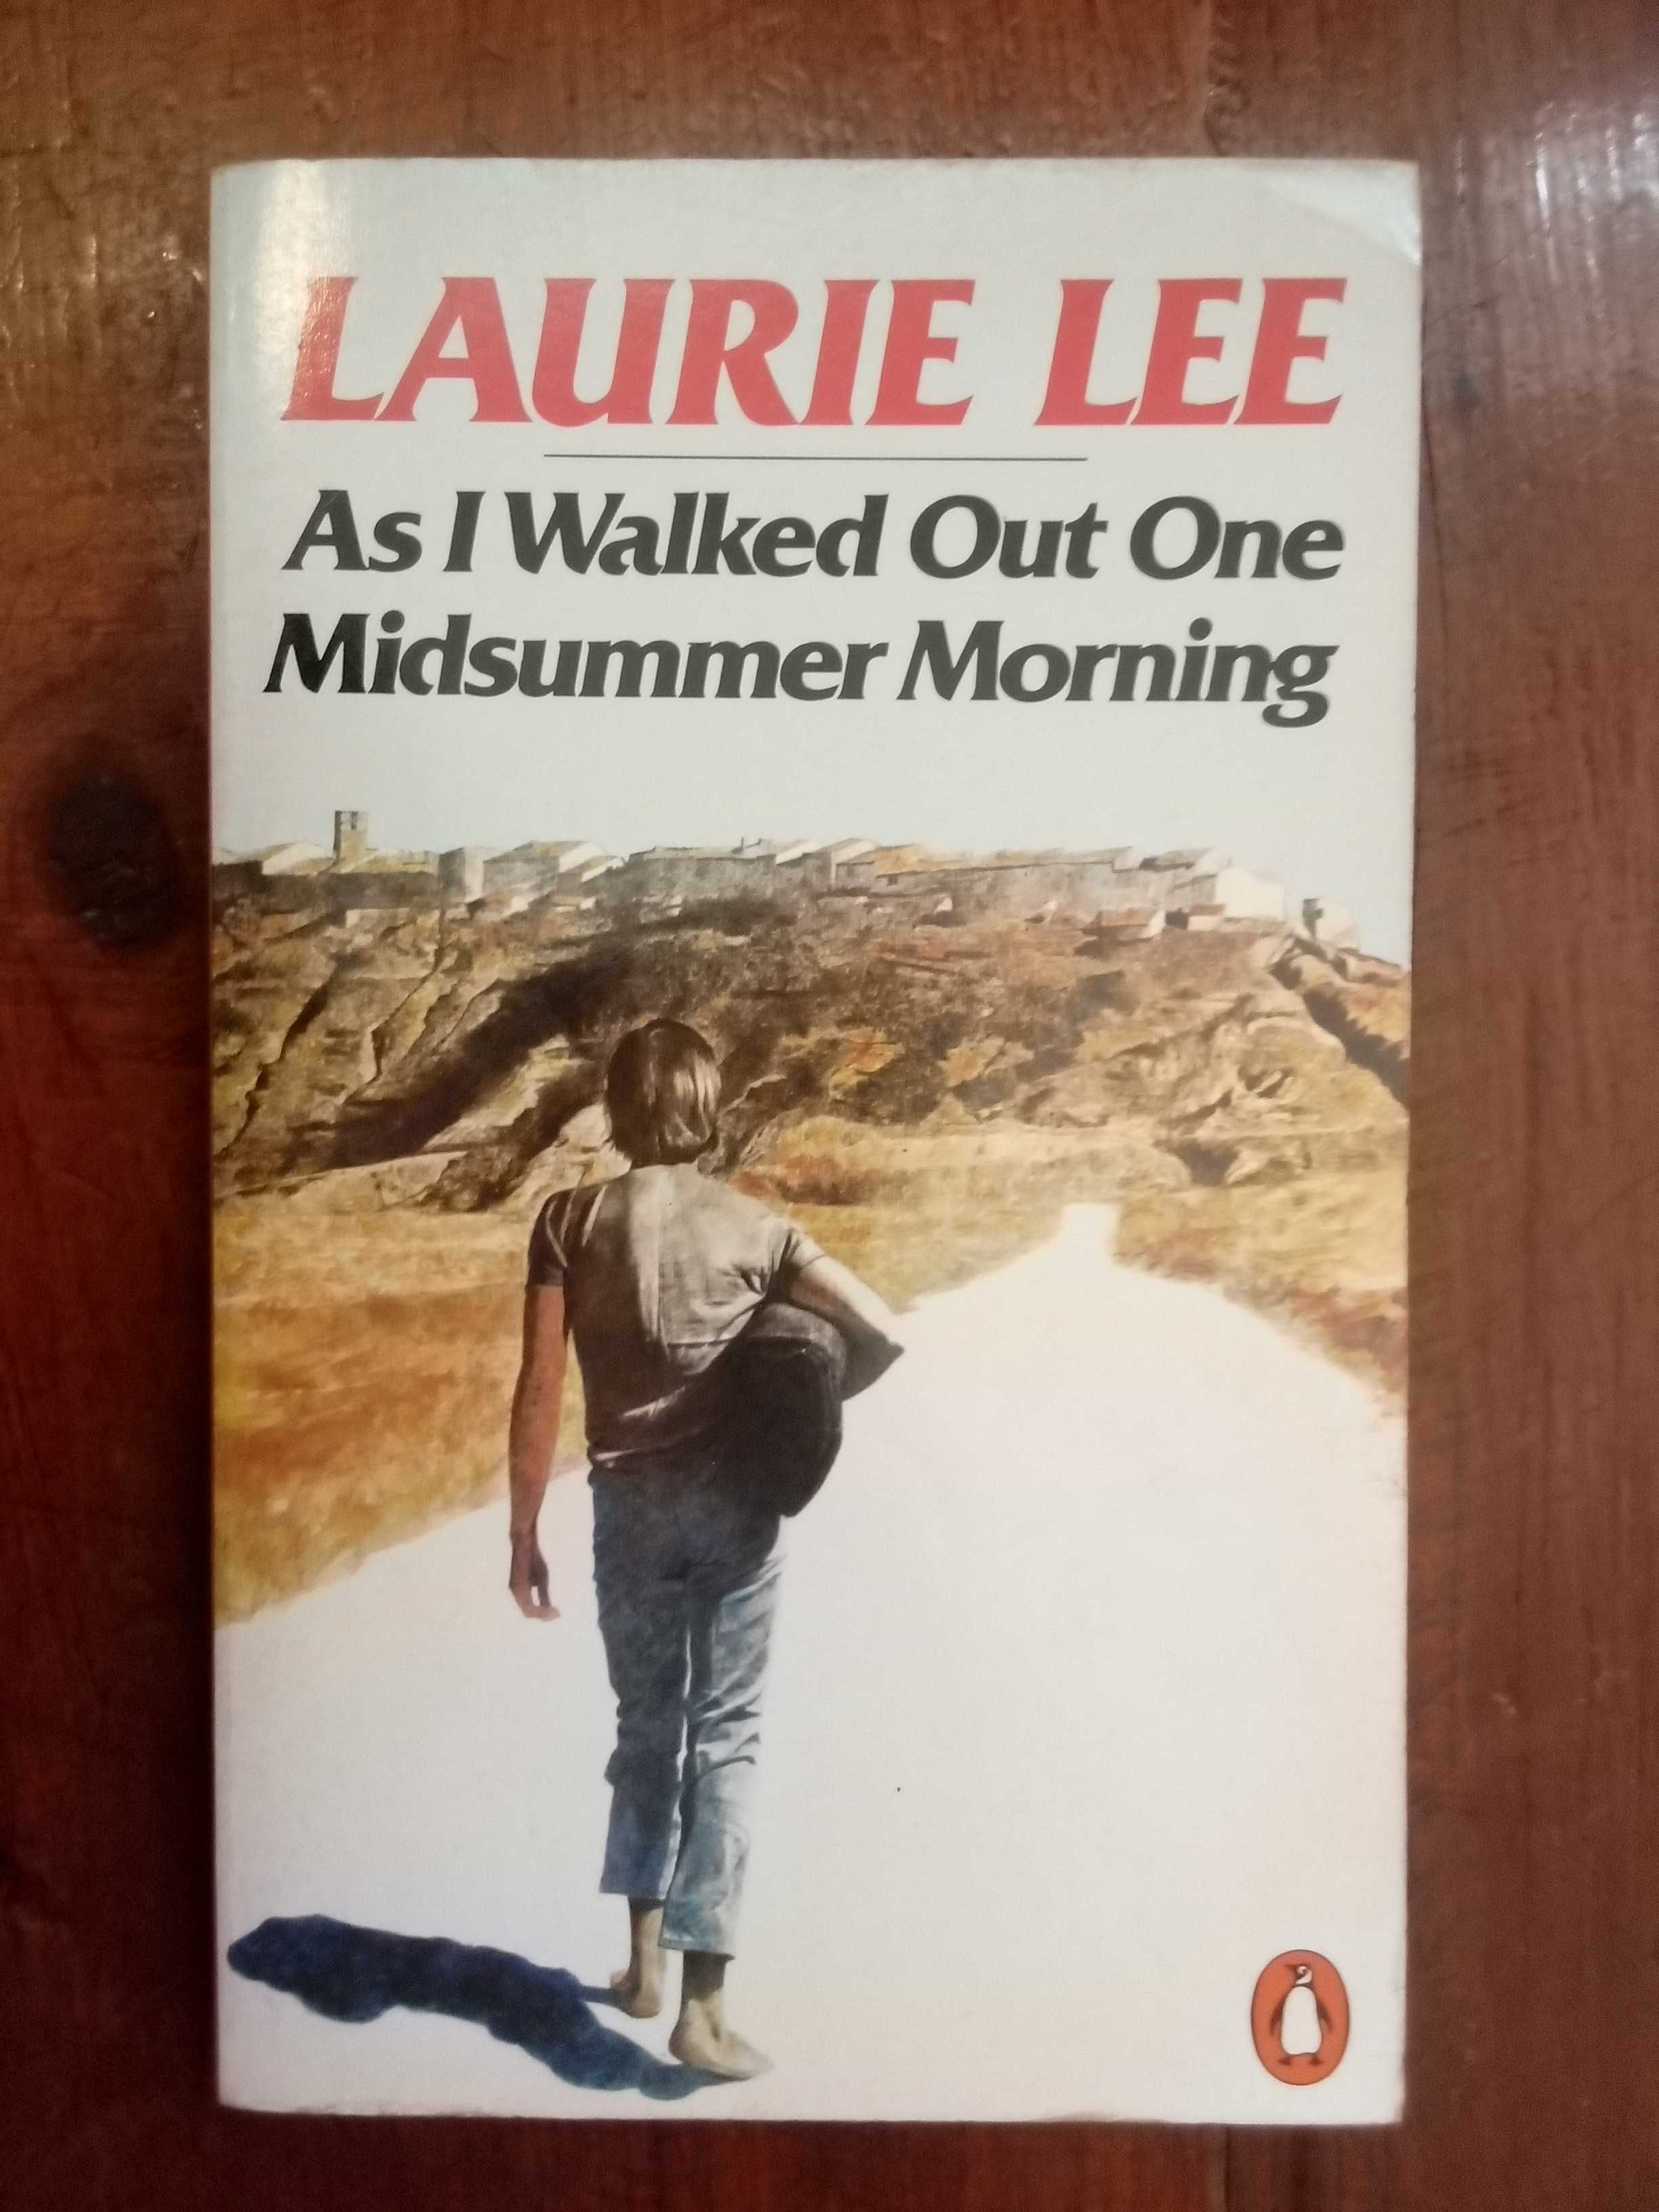 Laurie Lee - As I walked out one midsummer morning